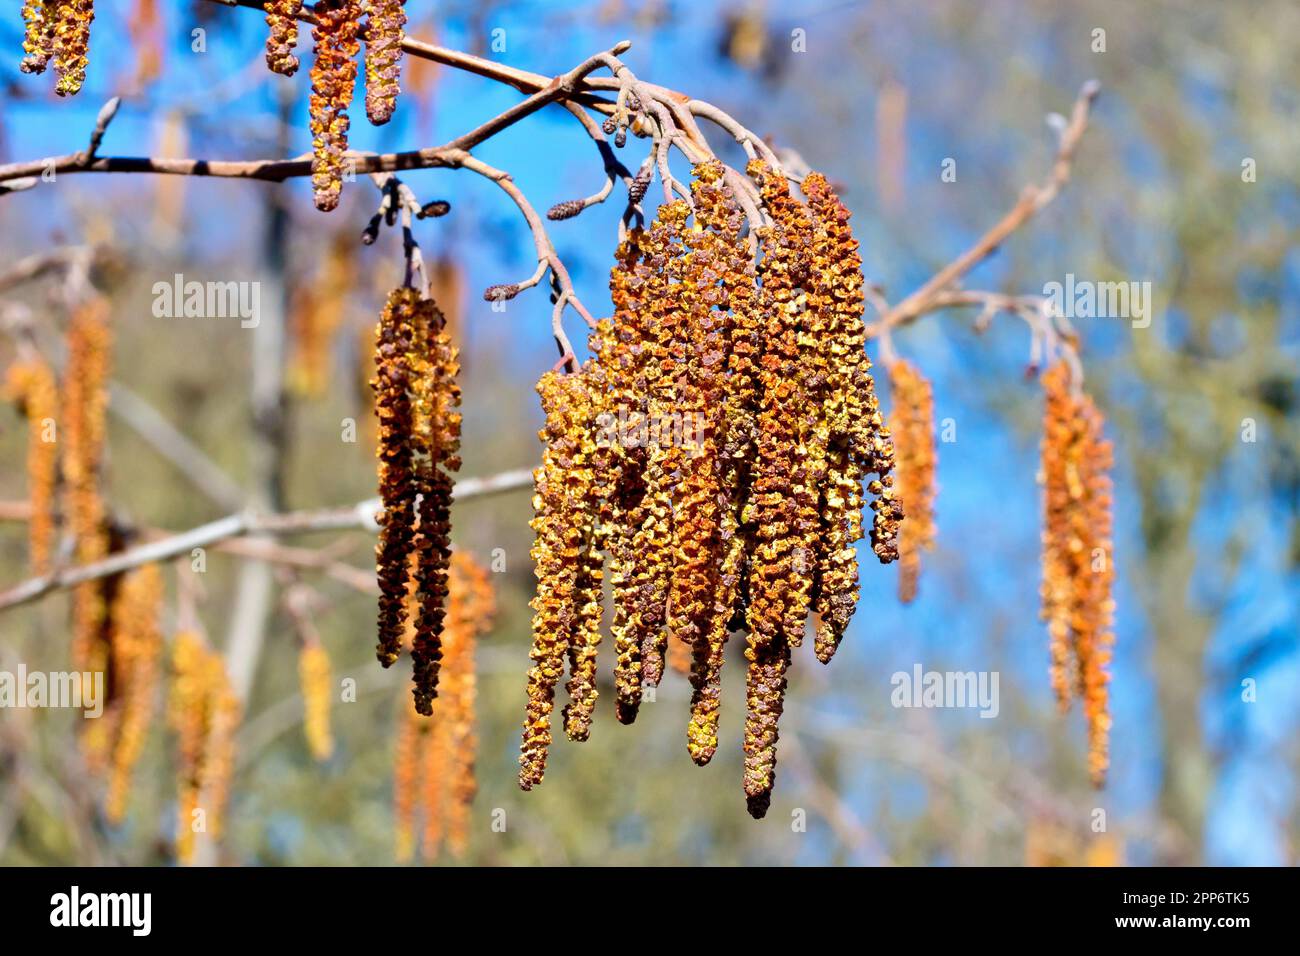 Alder (alnus glutinosa), close up of a cluster of male catkins with the small red female flowers above them on the branch. Stock Photo